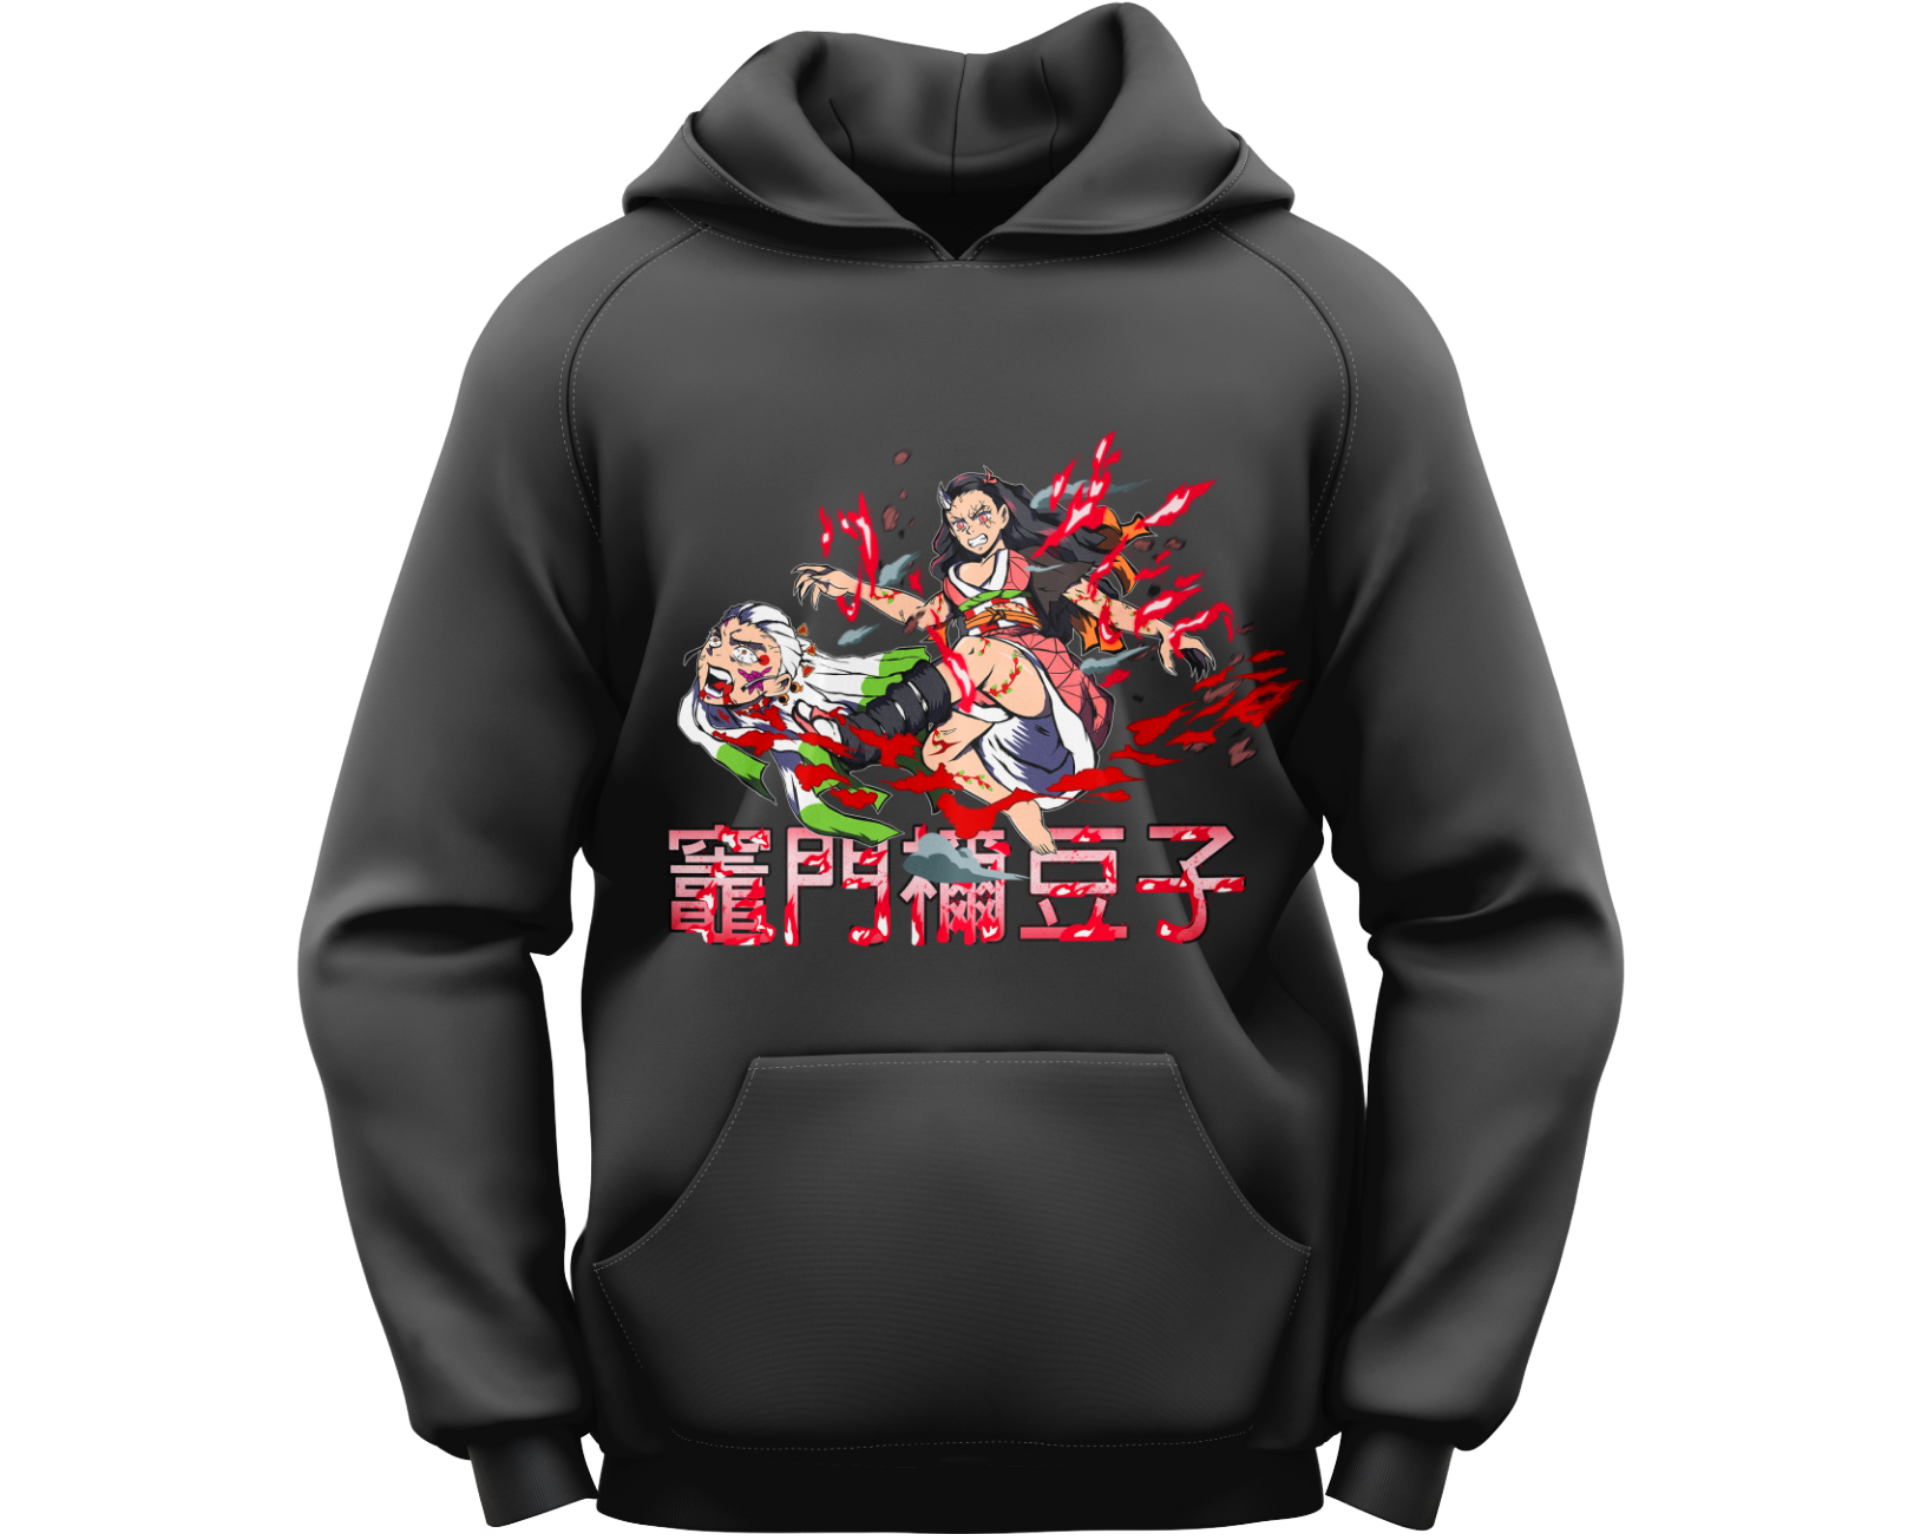 Shop Anime Hoodie Design | UP TO 60% OFF